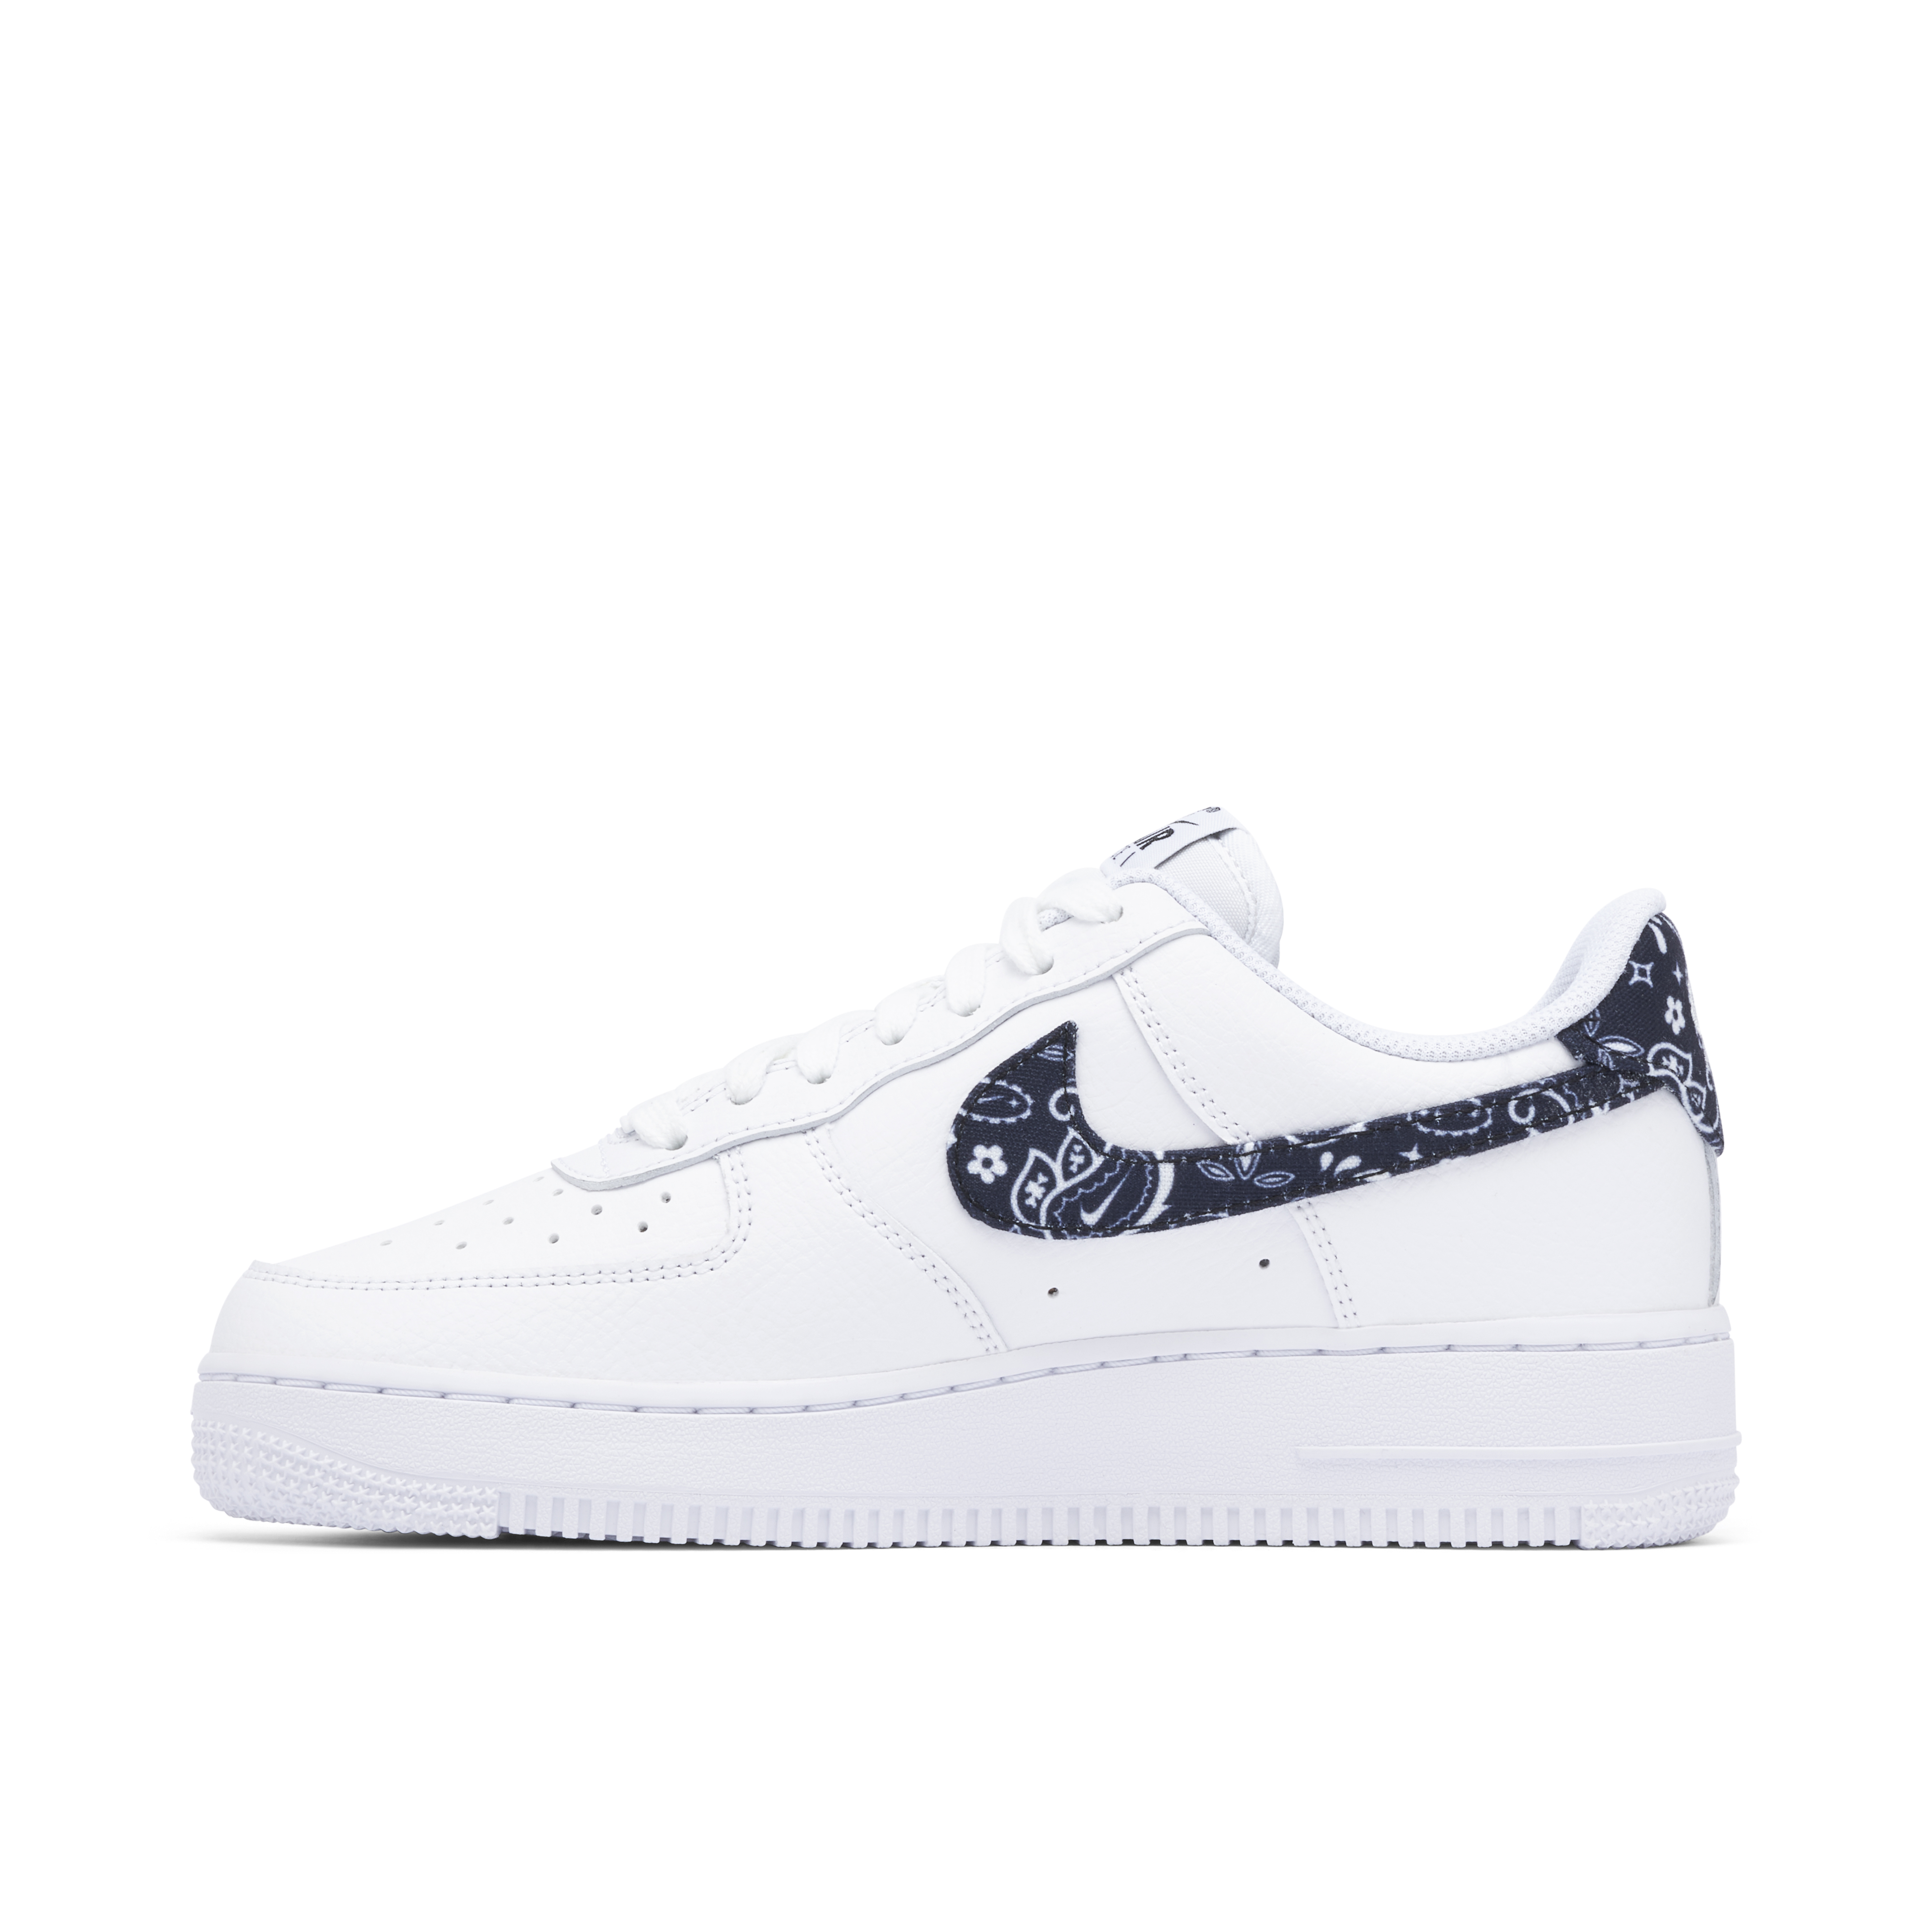 Nike Air Force 1 Low “ Blue Paisley” Size 7W for Sale in San Jose